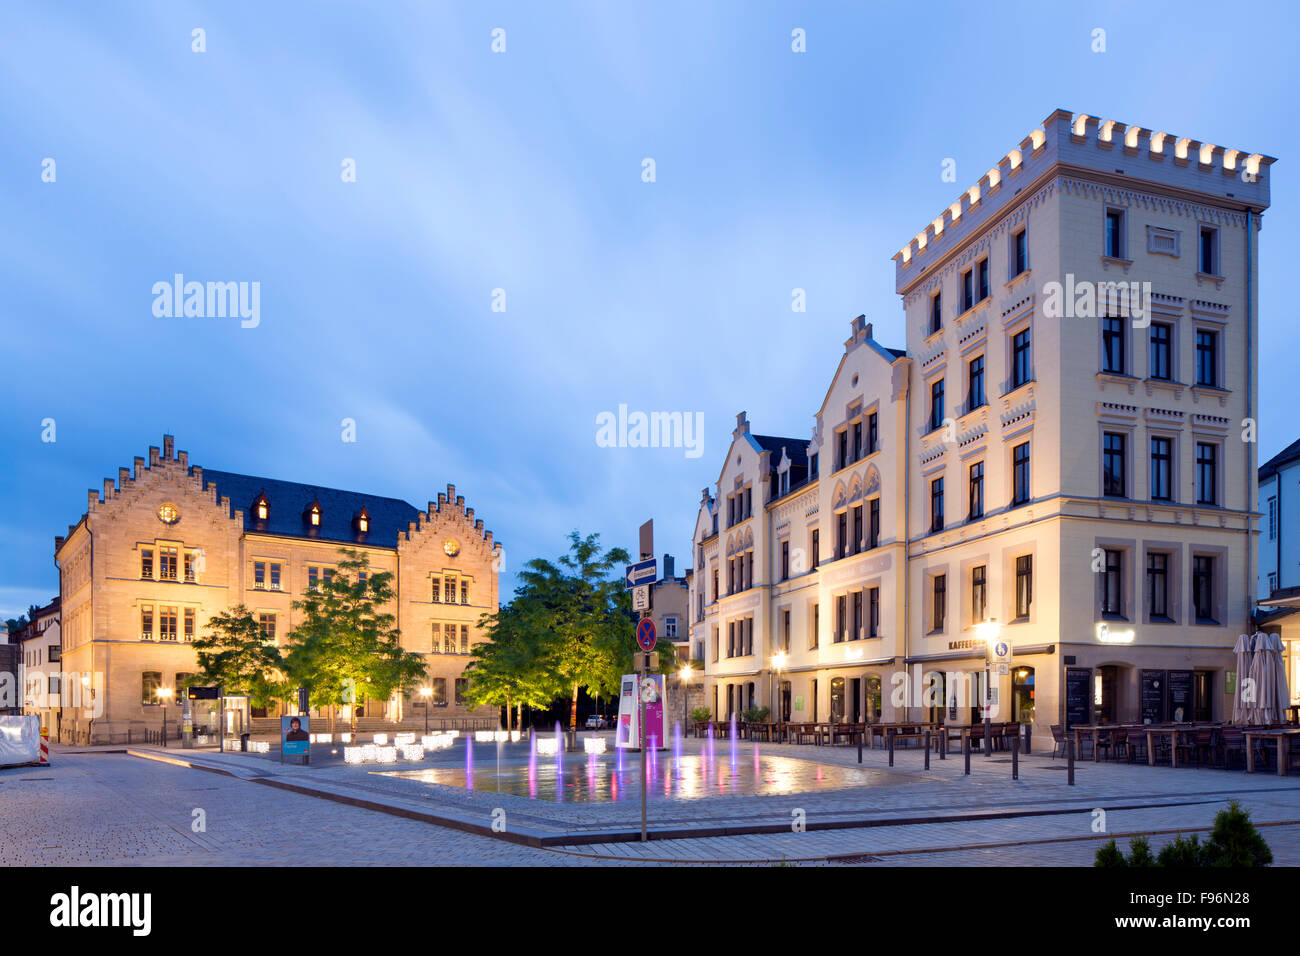 Albertsplatz with Luther Elementary School and historic residential and commercial building, Coburg, Upper Franconia, Bavaria Stock Photo